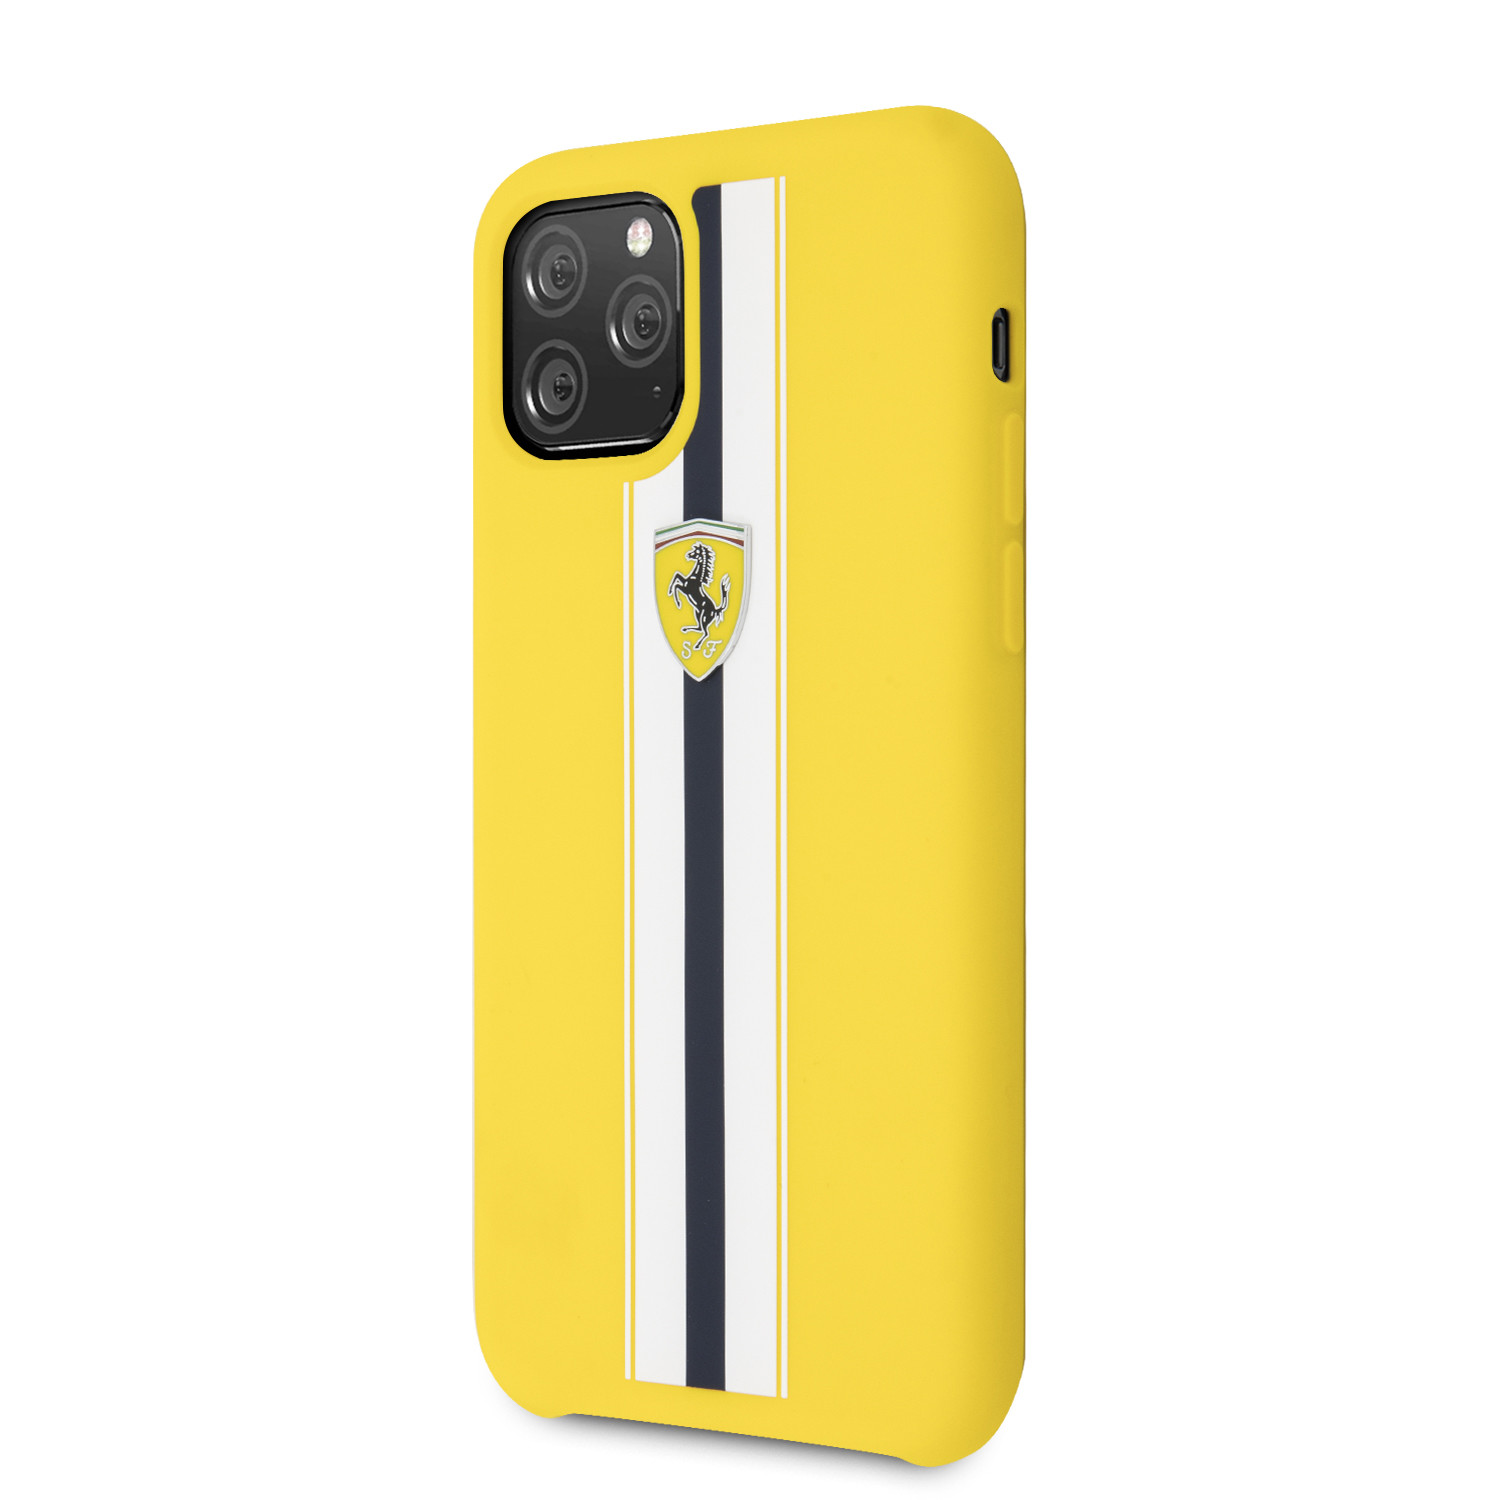 Silicone Case Stripes Yellow Iphone 11 Pro Cg Mobile Touch